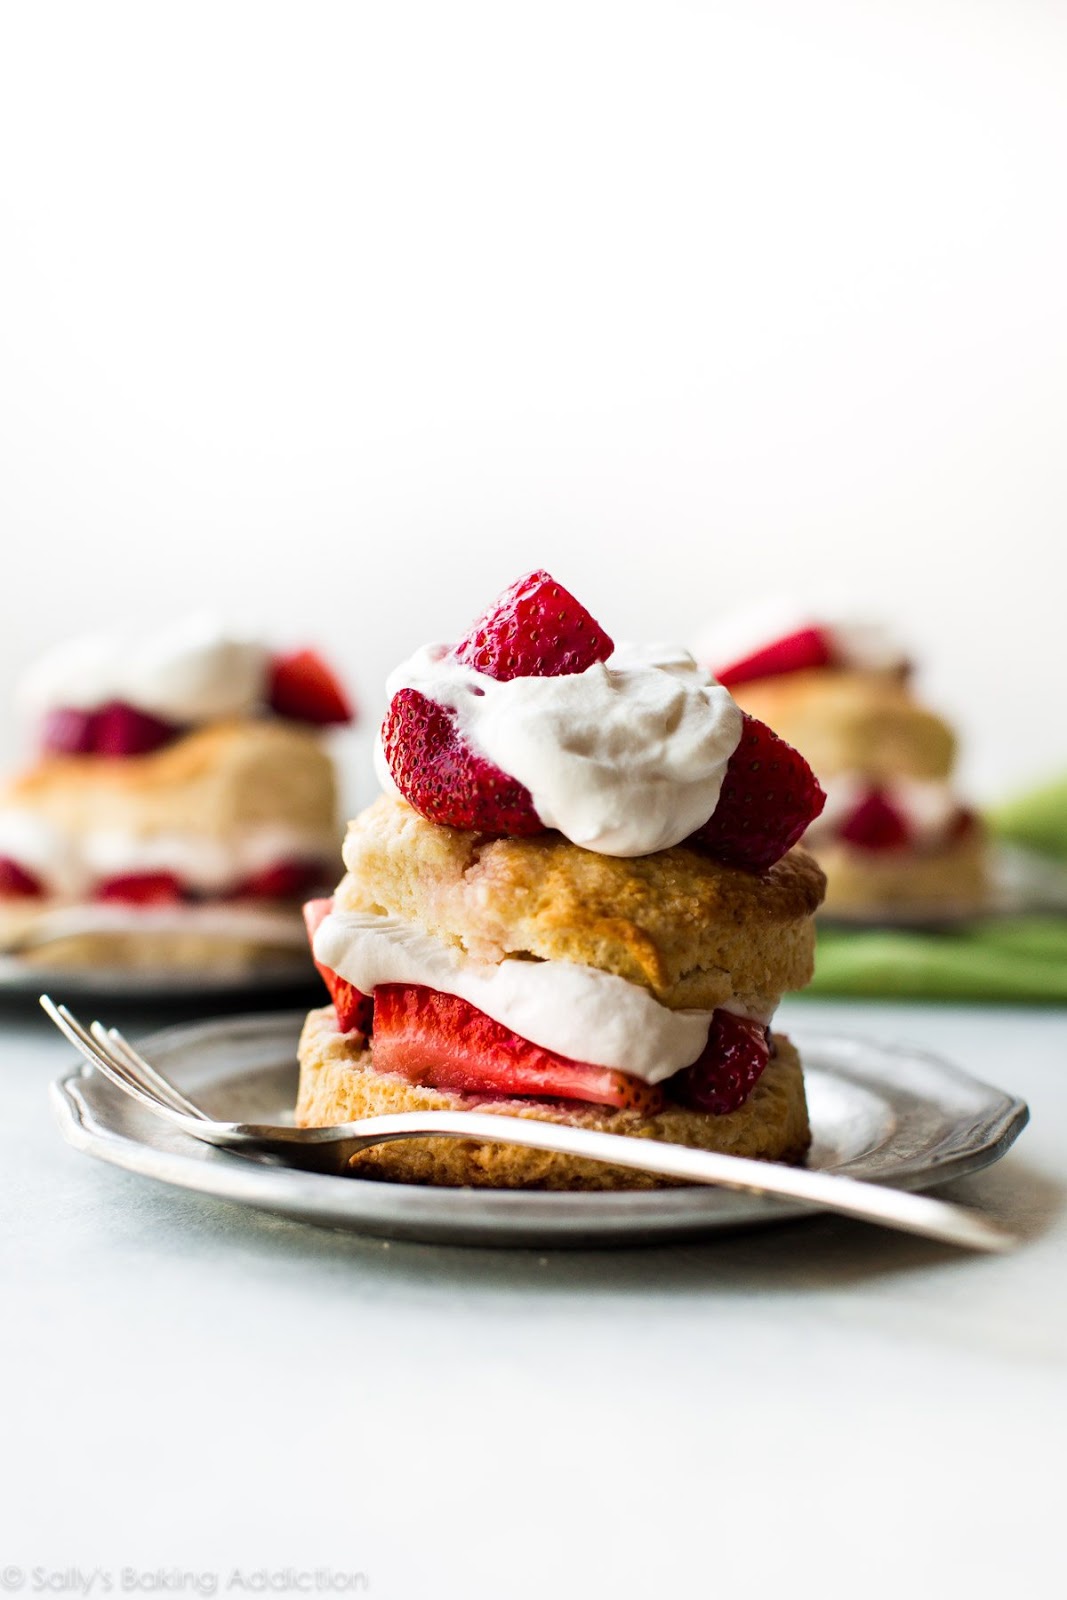 for an easy homemade strawberry shortcake recipe. for delicious single laye...